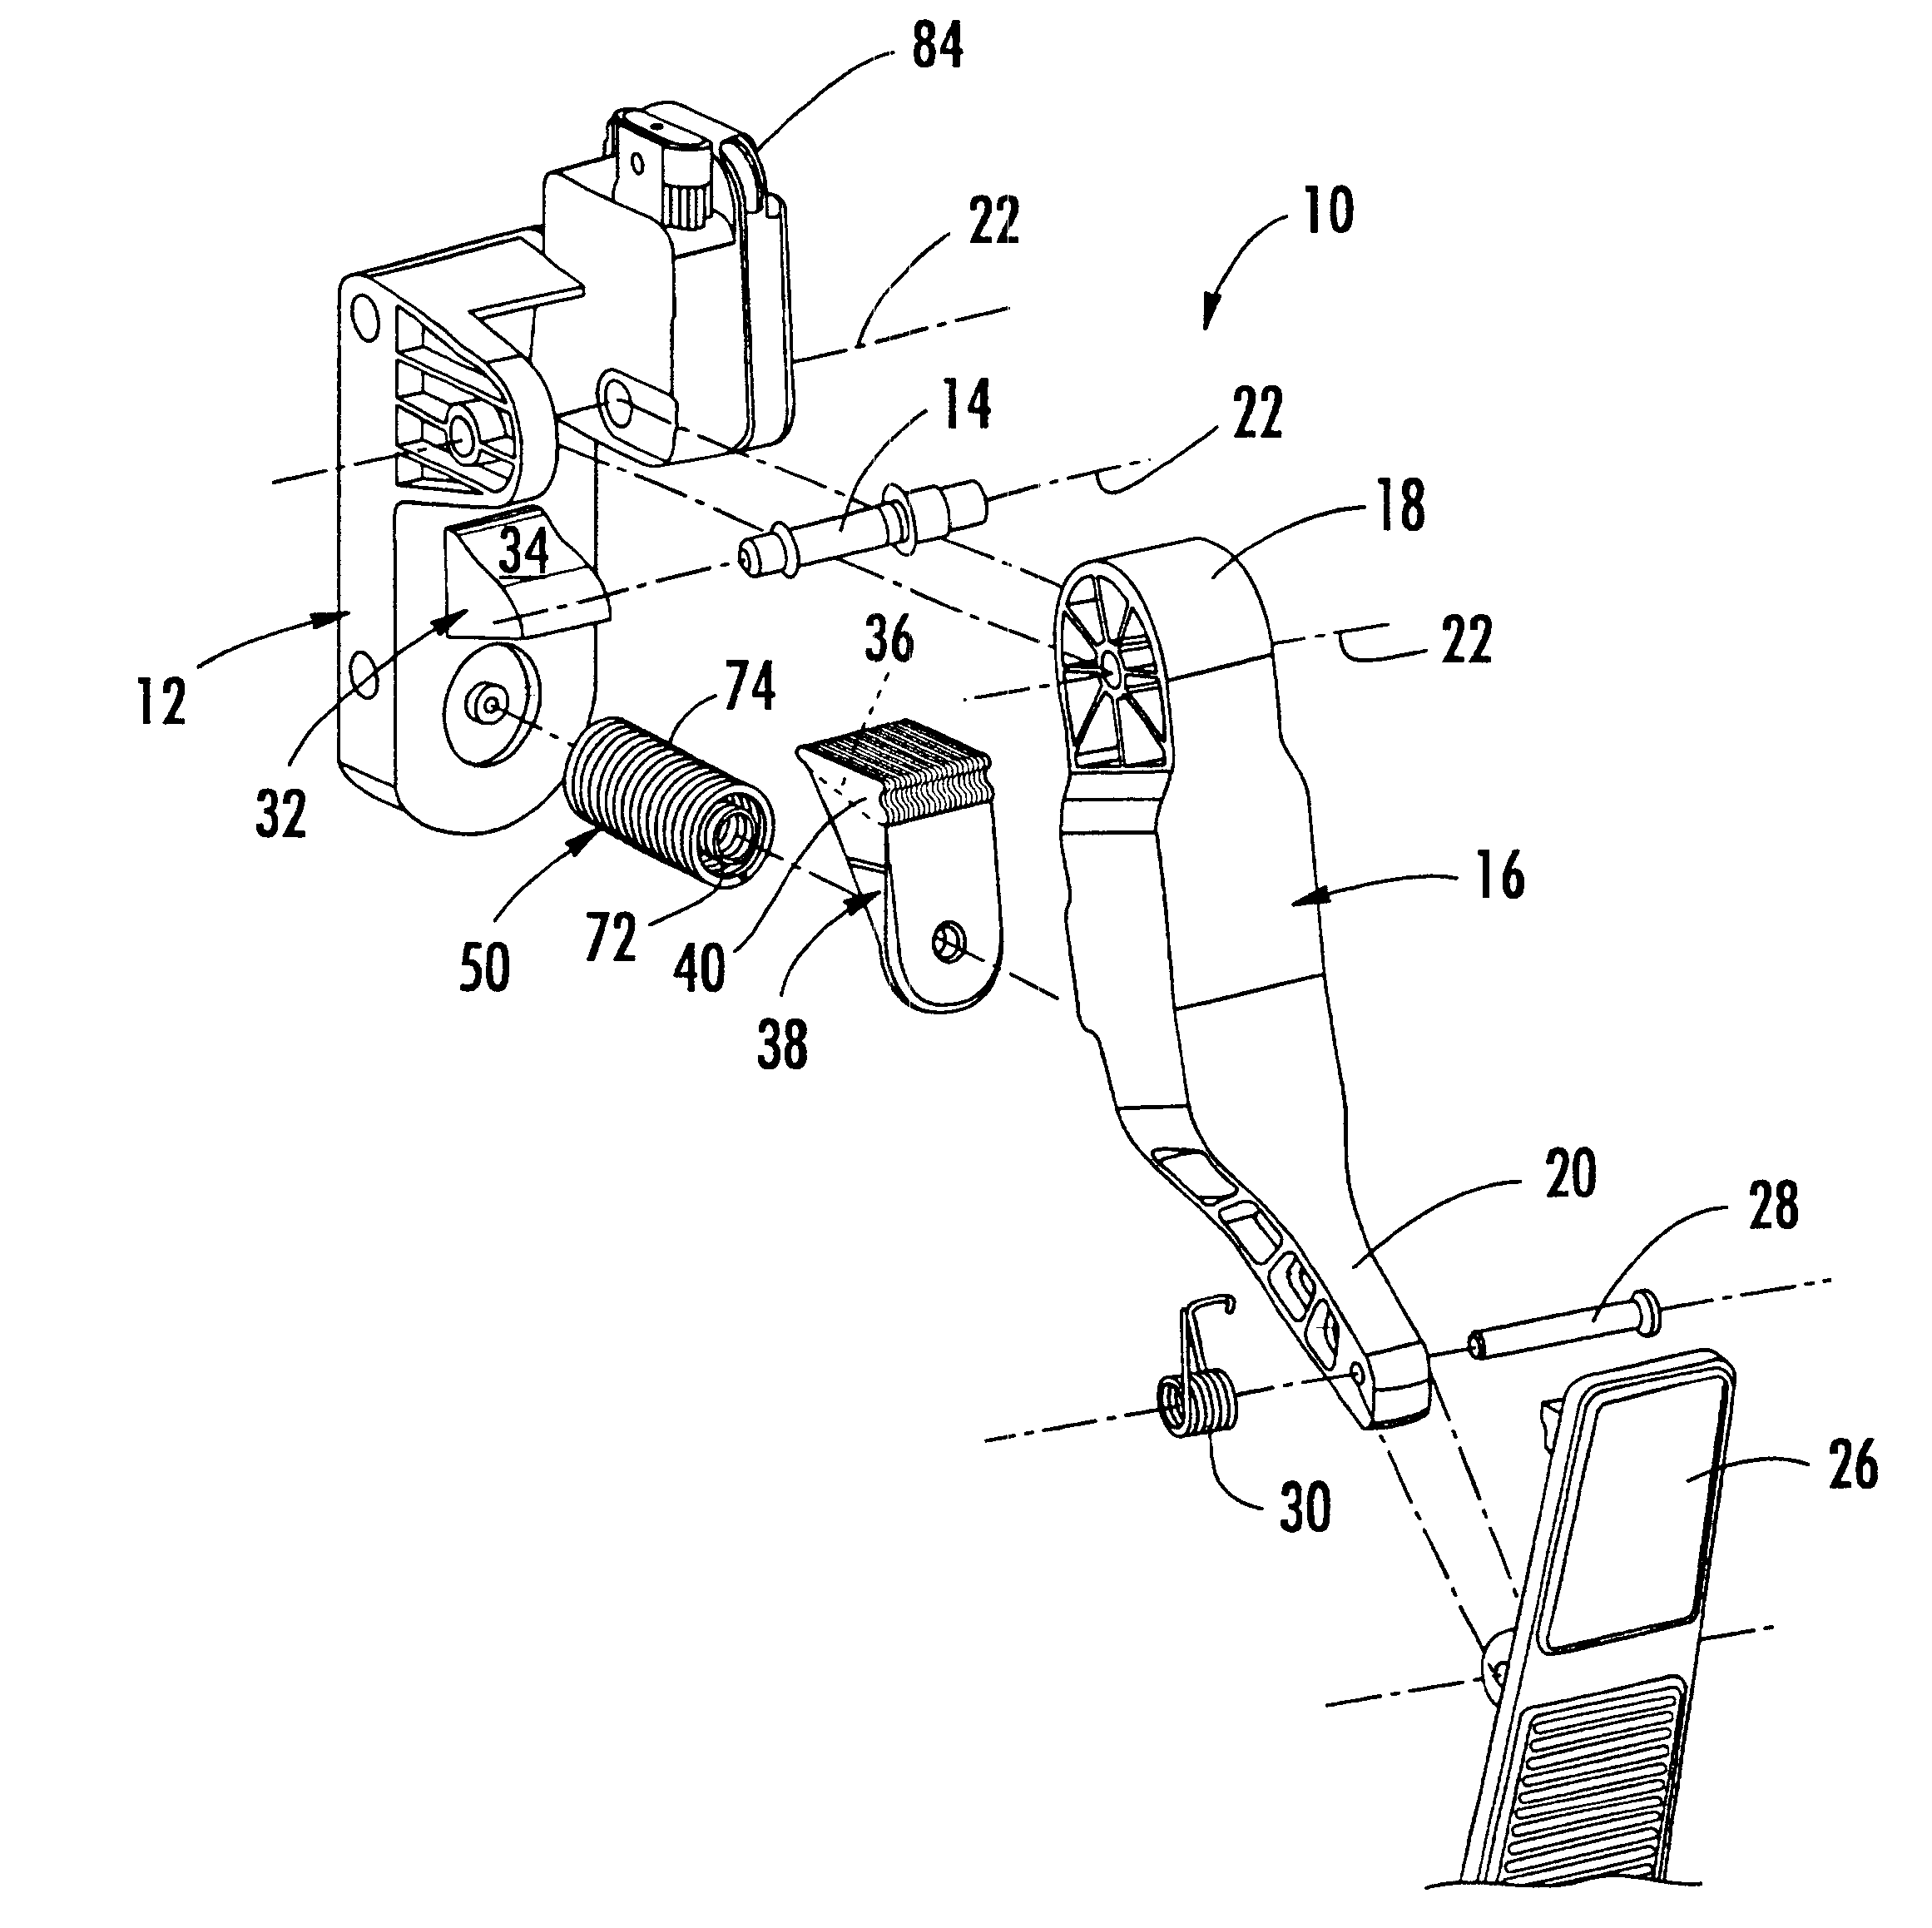 Electronic pedal assembly and method for providing a tuneable hystersis force